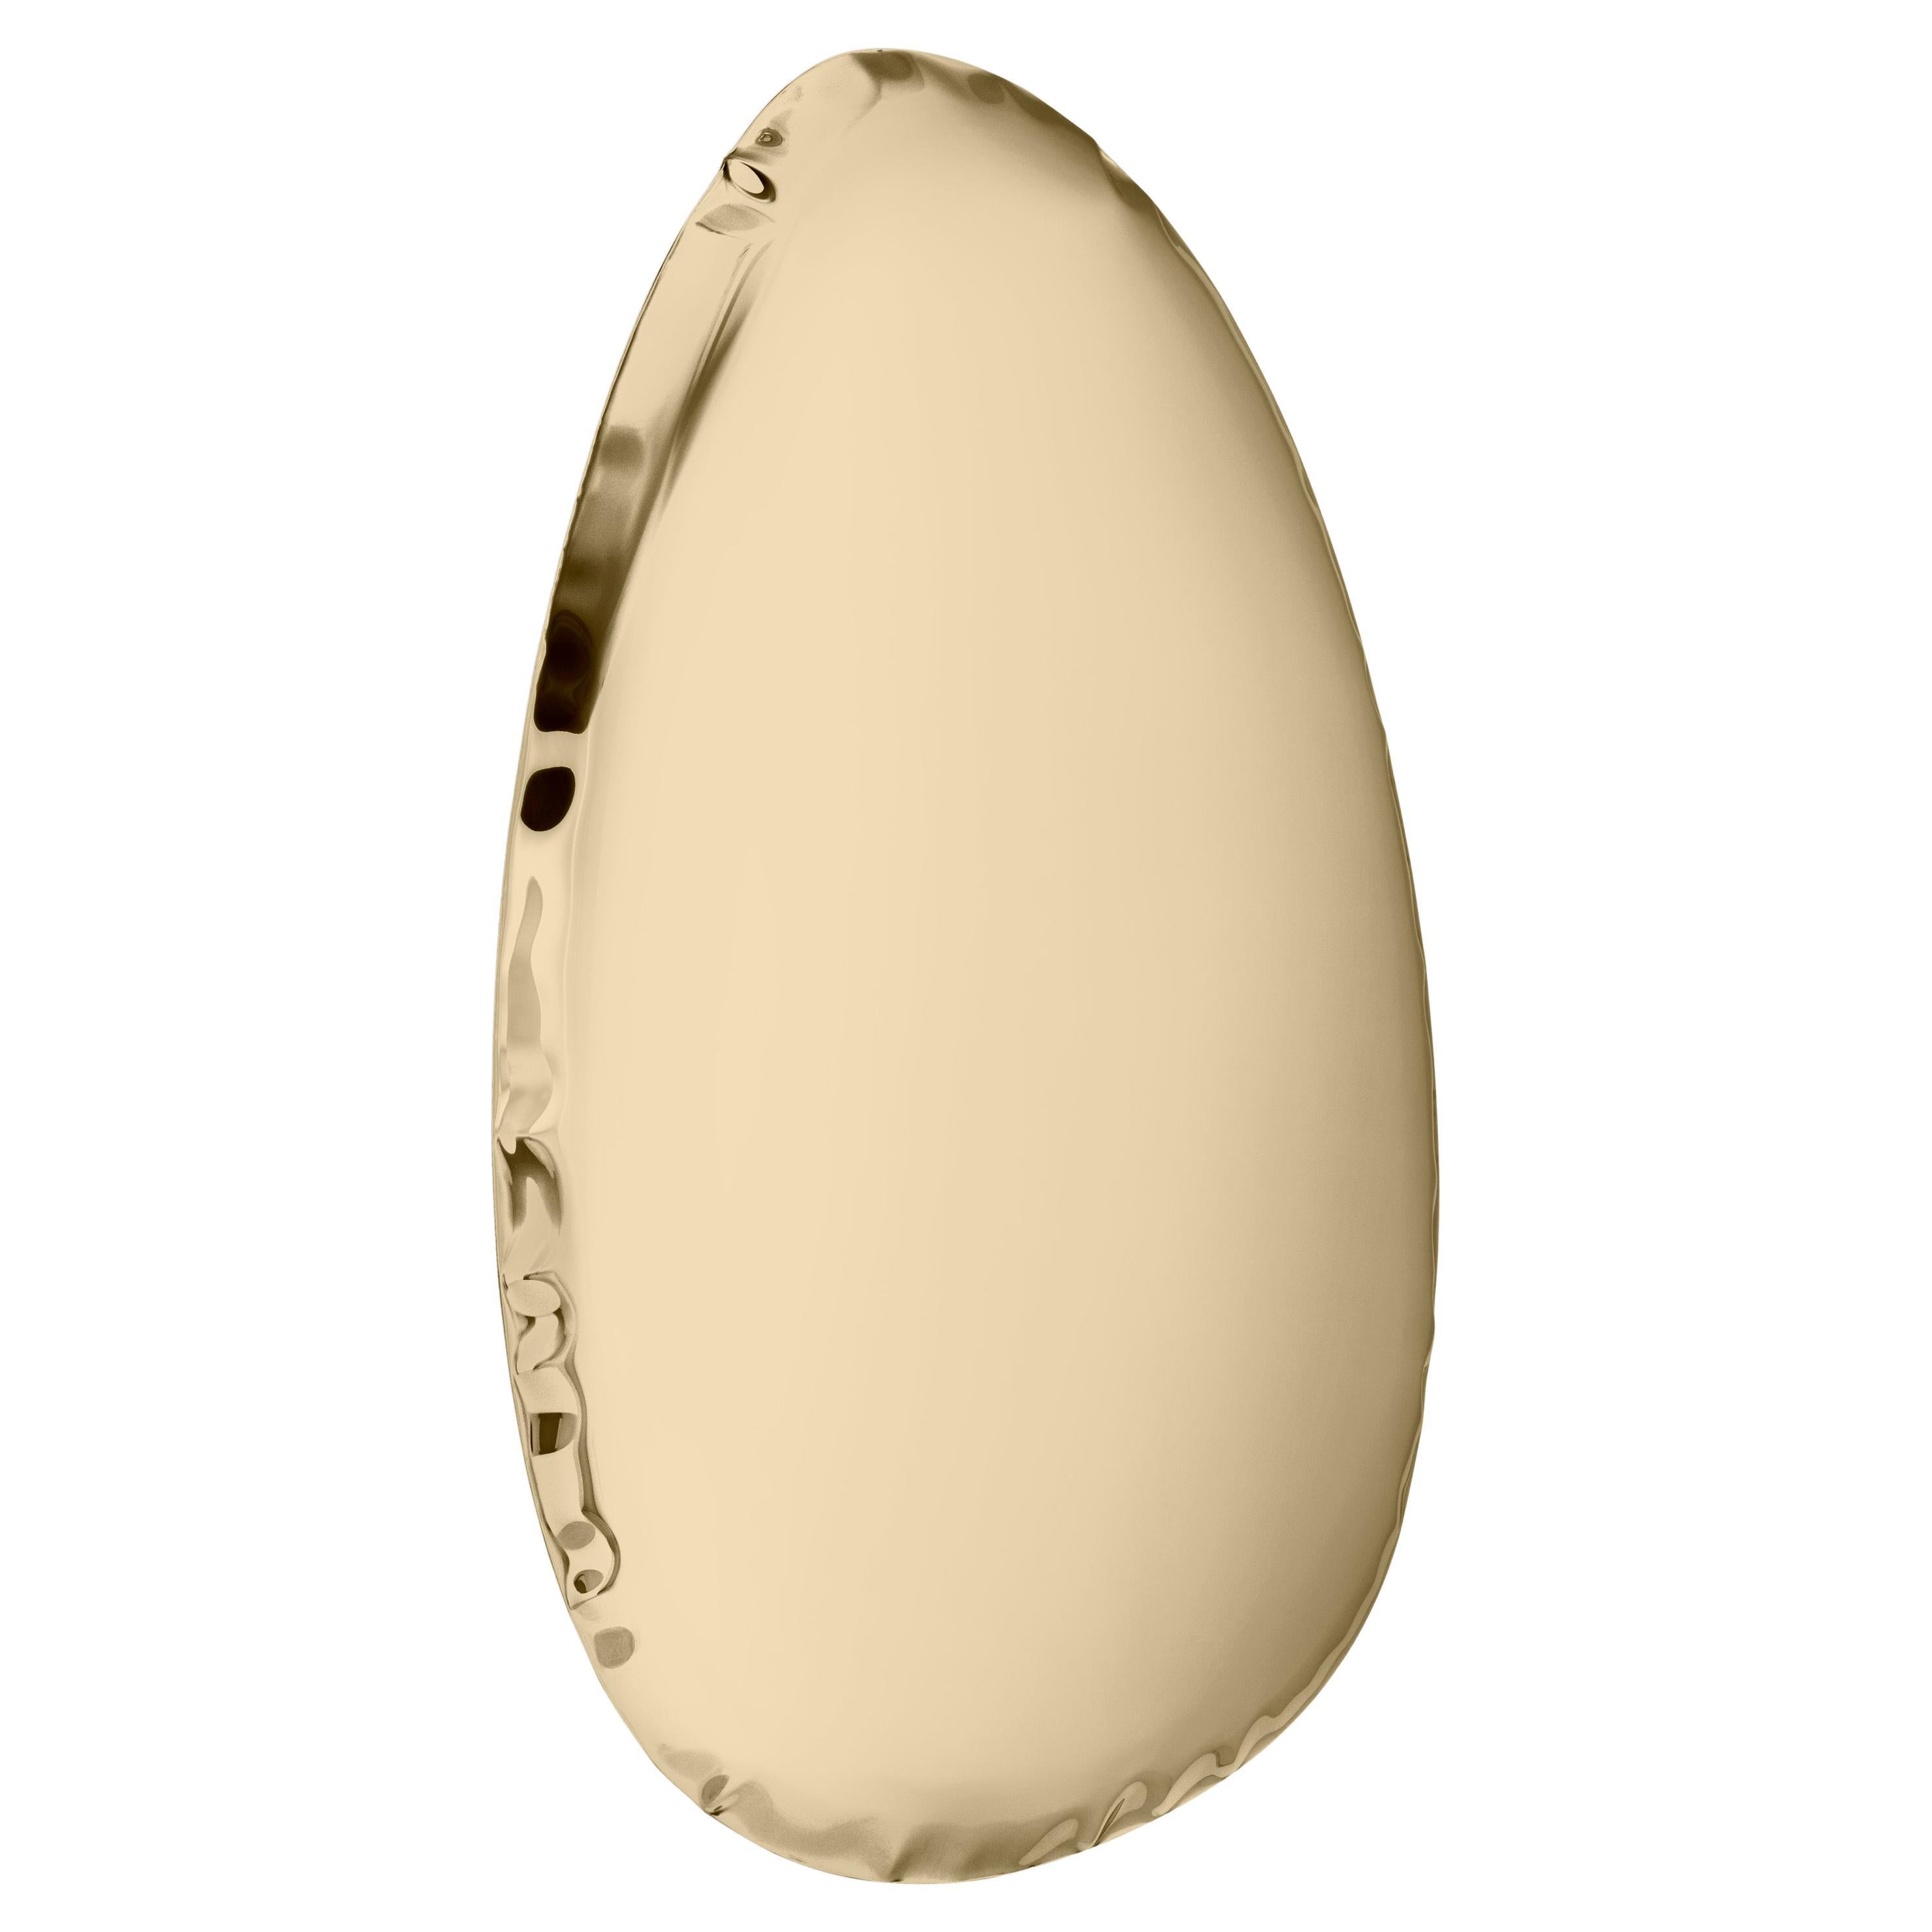 Tafla O4.5 Polished Stainless Steel Classic Gold Color Wall Mirror by Zieta